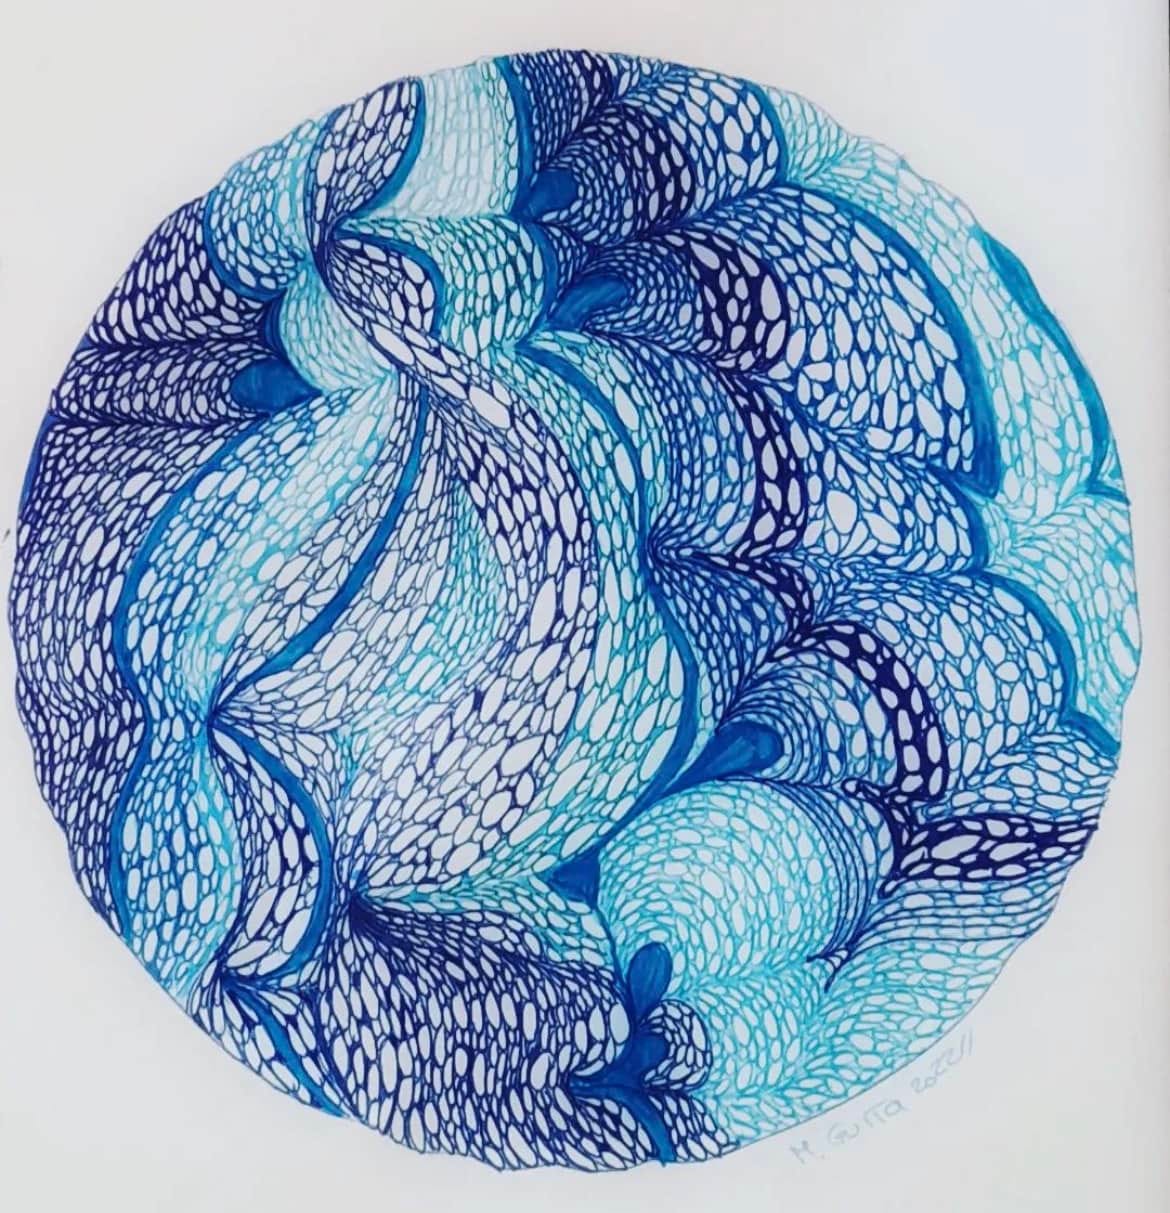 Abstract circle art. Various shades of blue. Almost like patterns of DNA folded on each other.